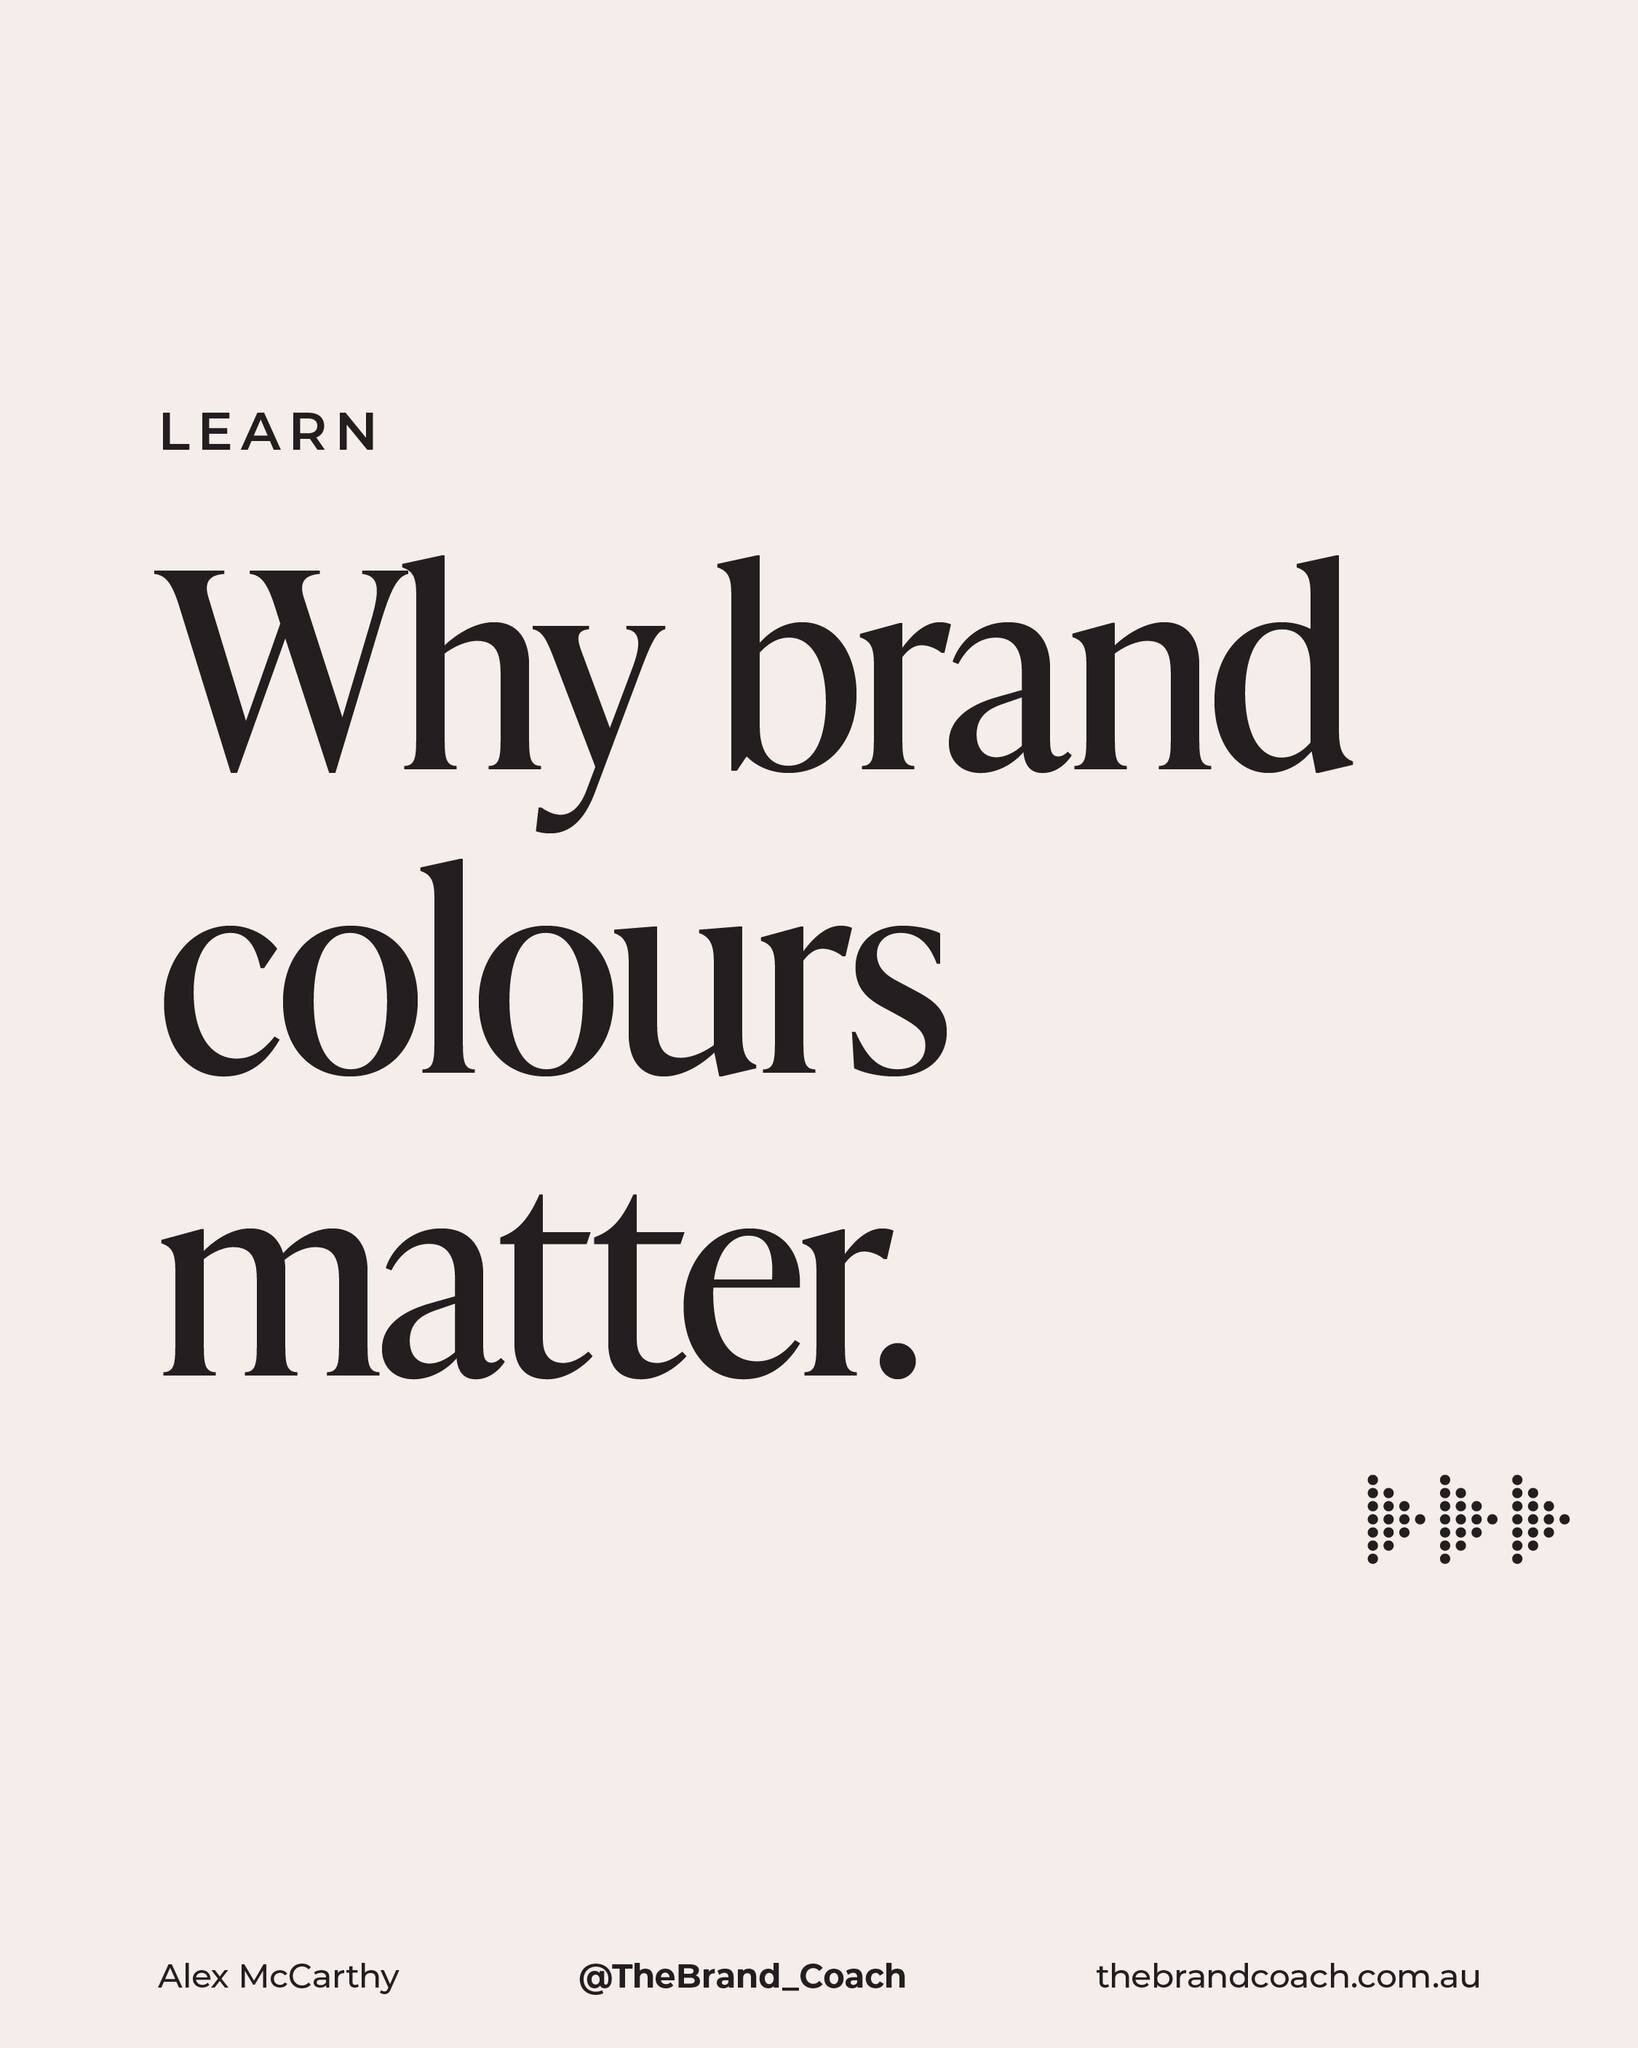 Ever wondered why certain brands instantly catch your eye? 👀 One reason is the use of COLOURS 🌸 Here are a few reasons why...

@thebrand_coach 

#brandidentitydesign #brandingdesign #brandingstrategy #colourpsychology #colourpsychology101 #branding